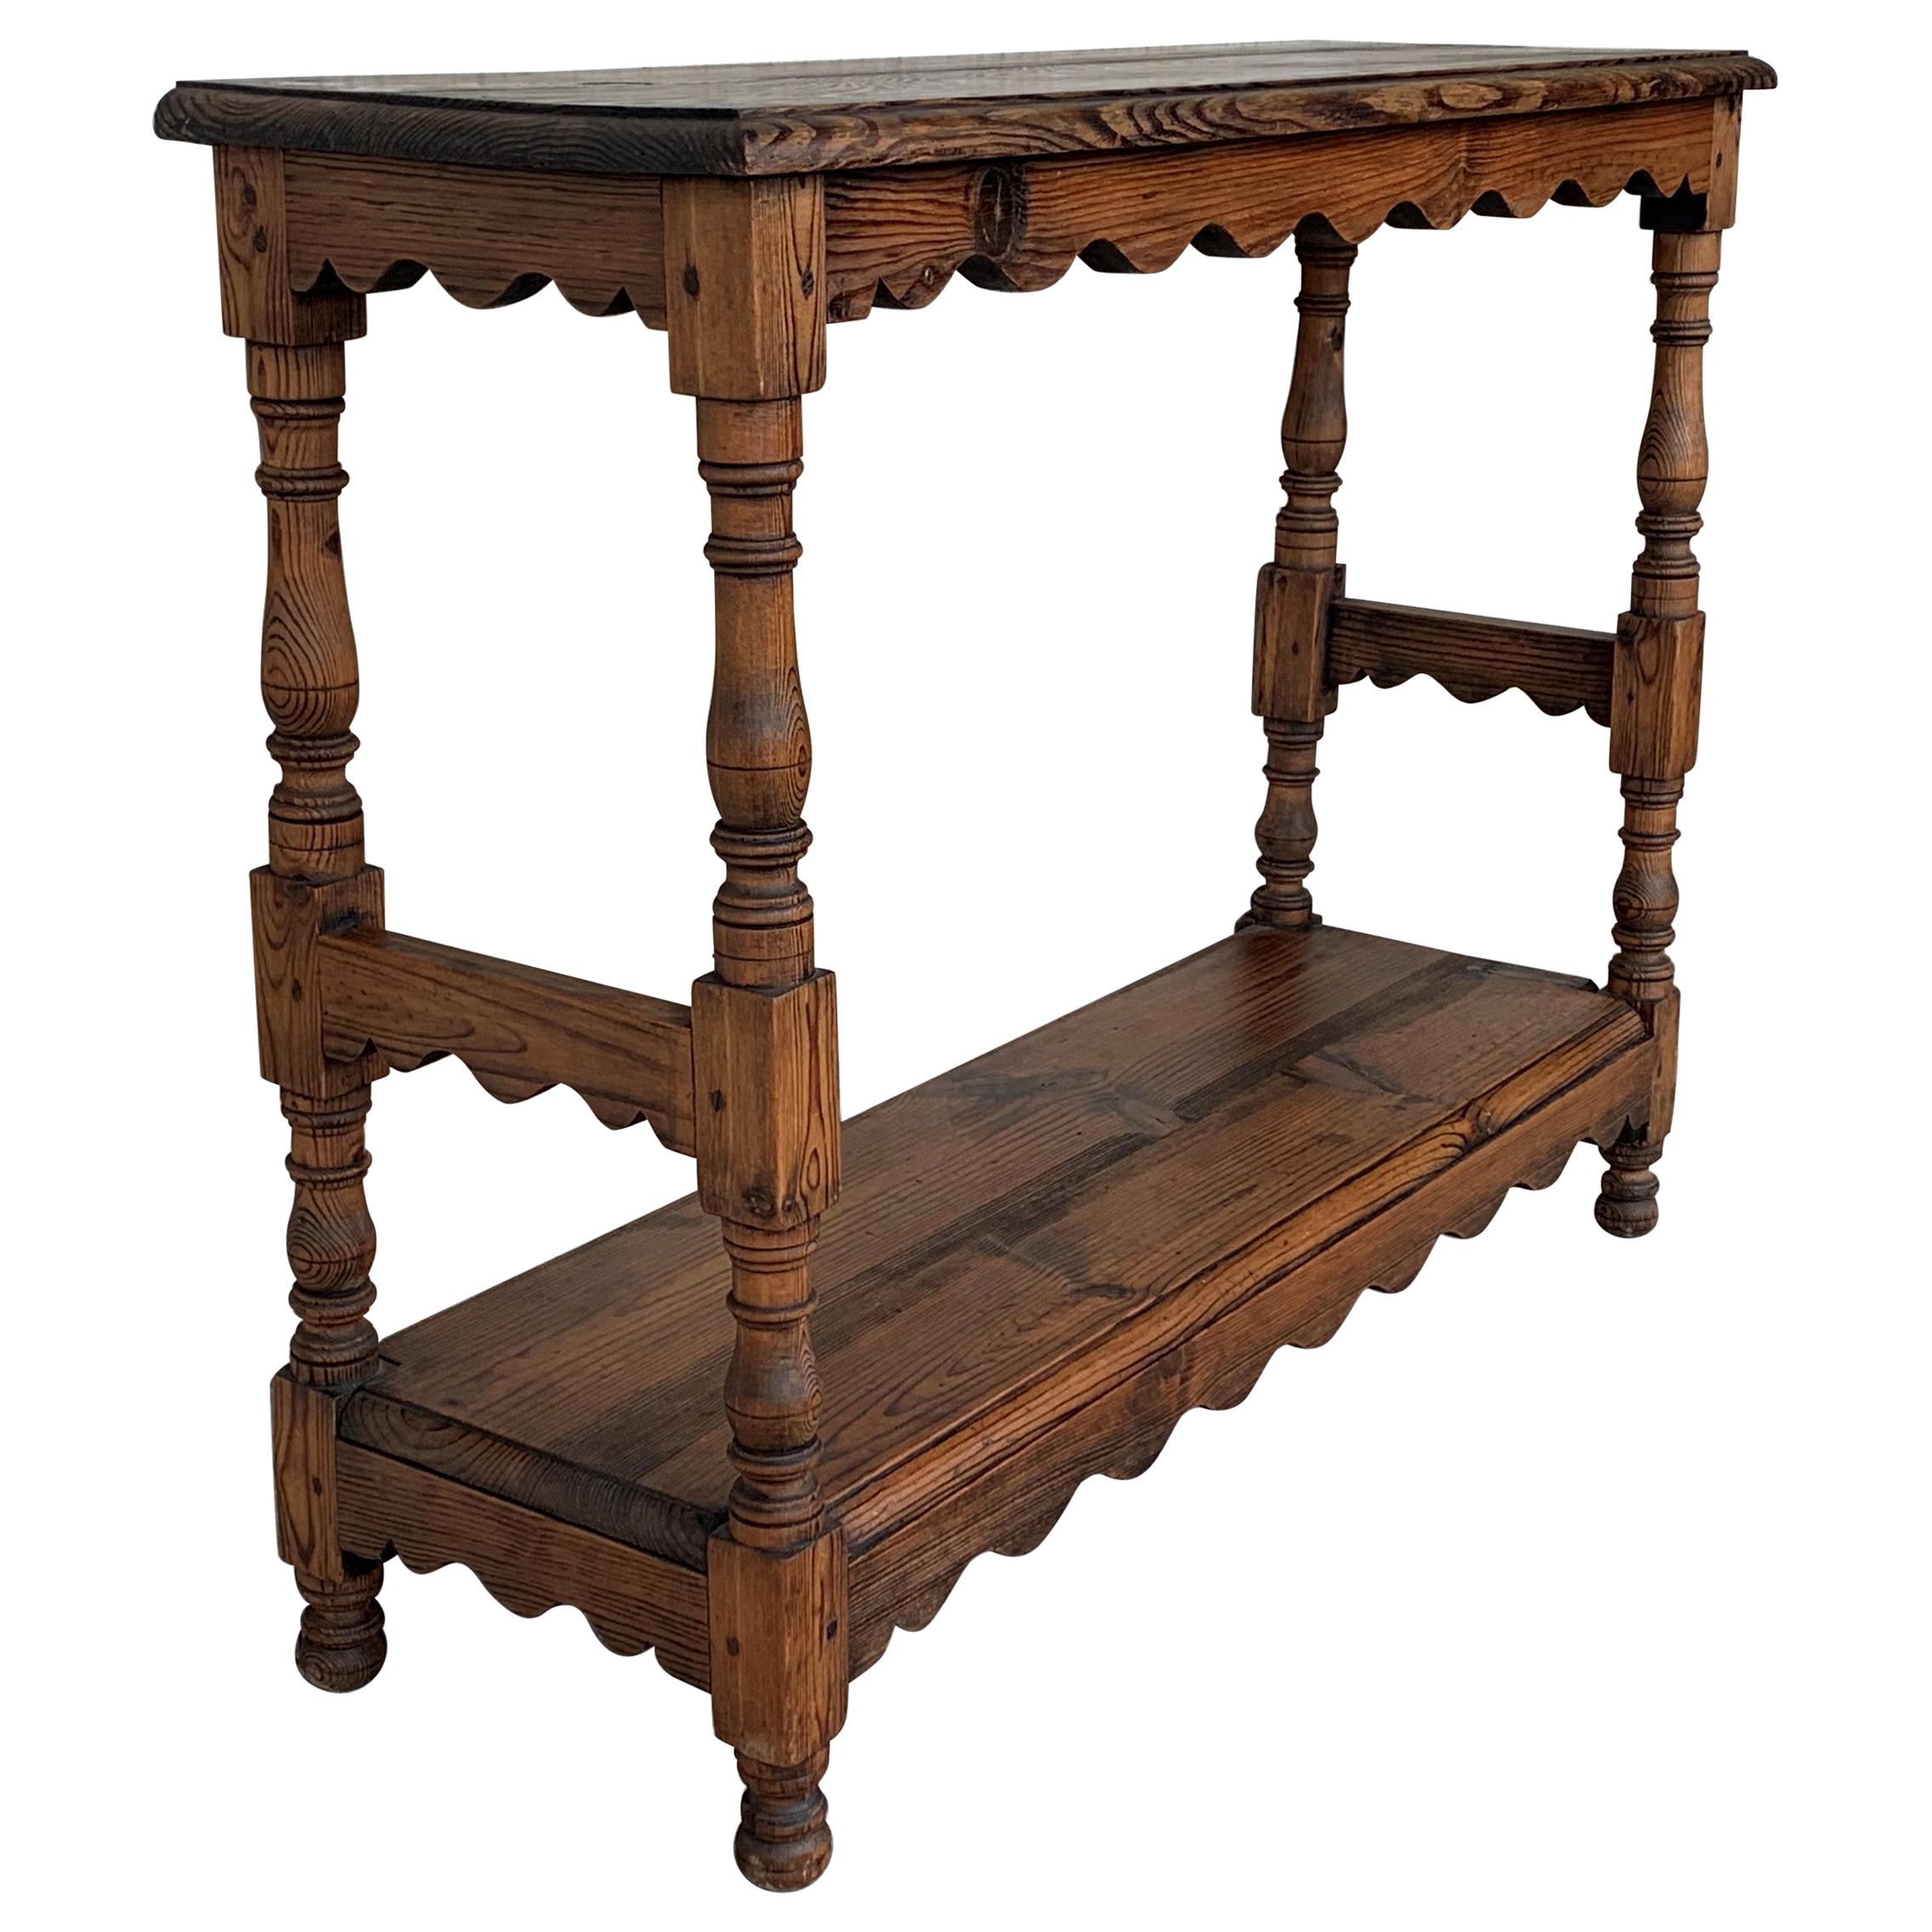 Country French Two-Tier Console Table in Old Pine